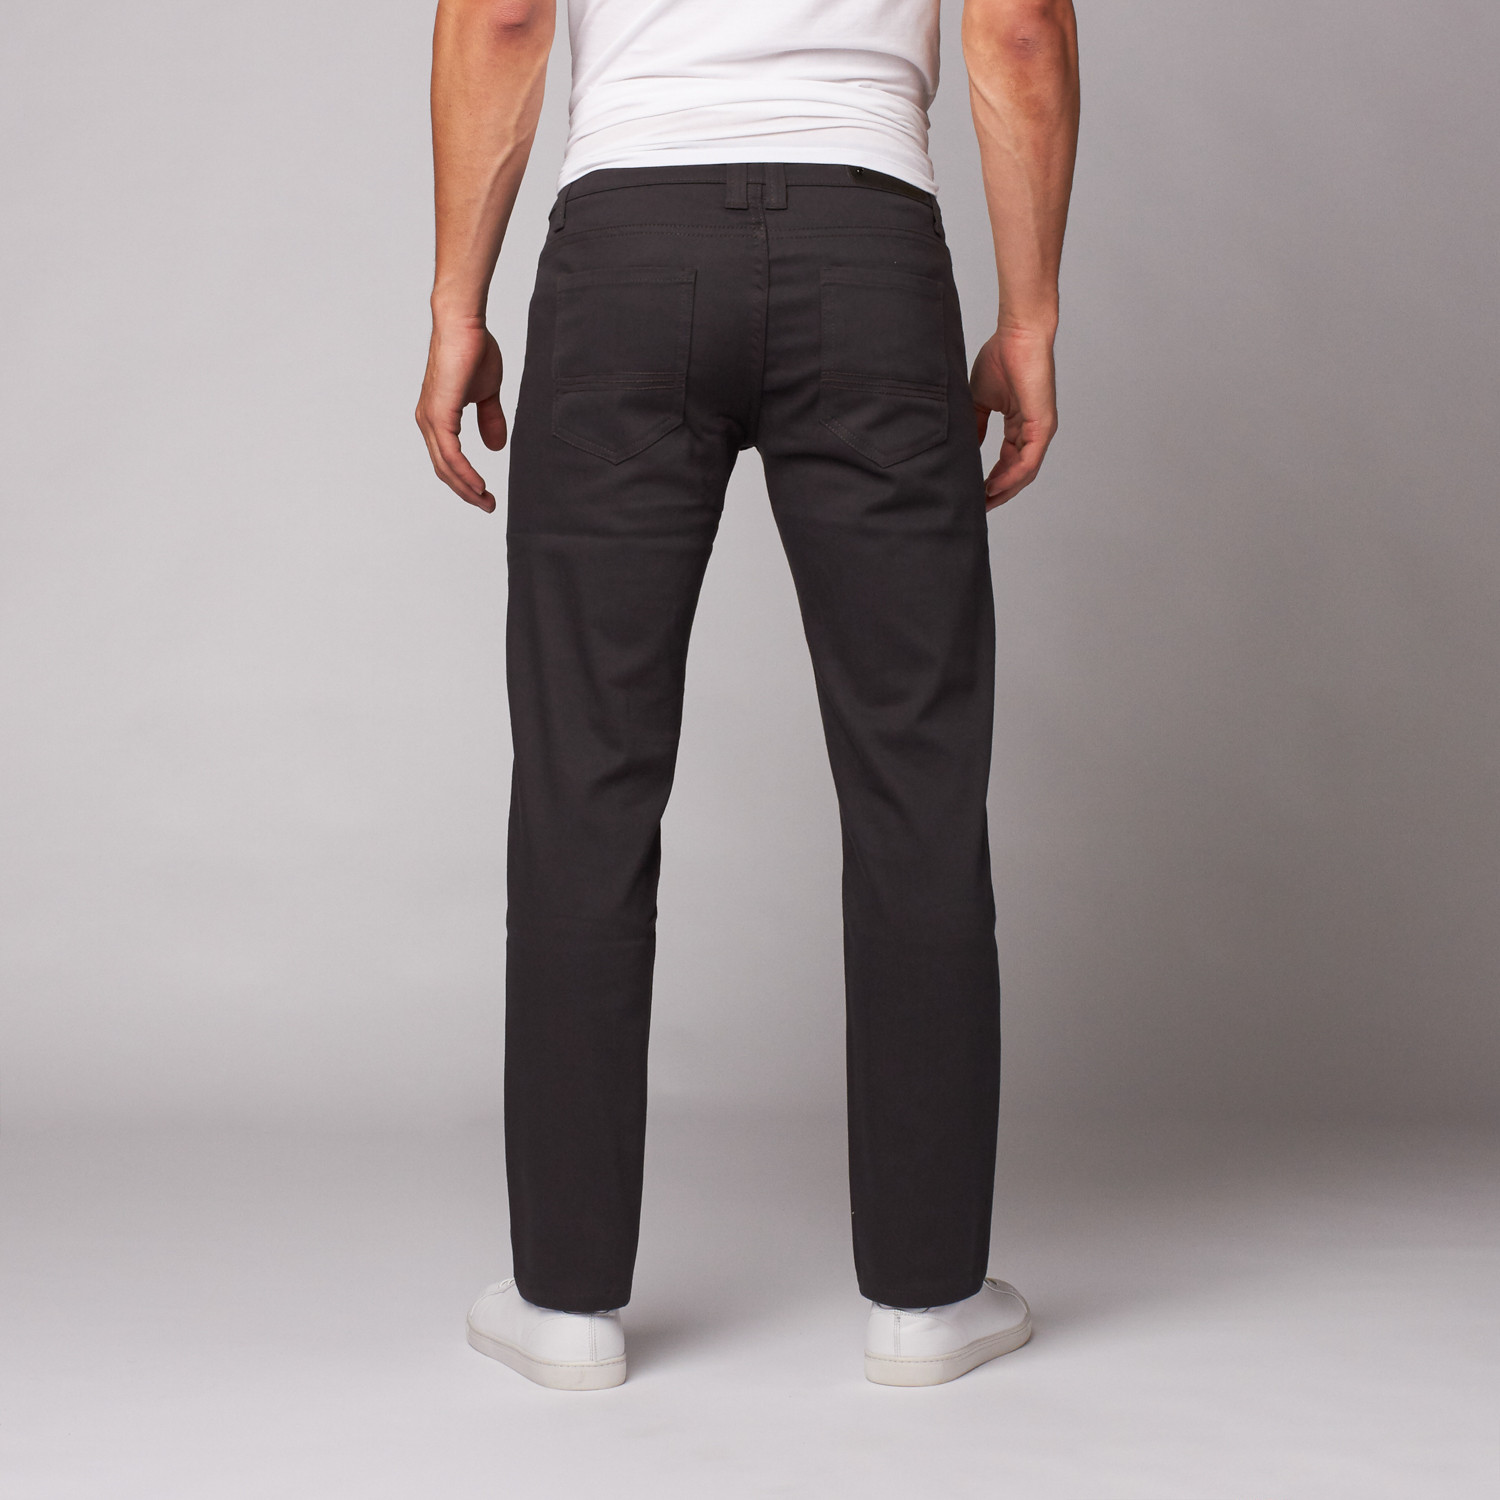 Truth Substance // Skinny Stretch Twill Pant // Charcoal (30WX30L ...